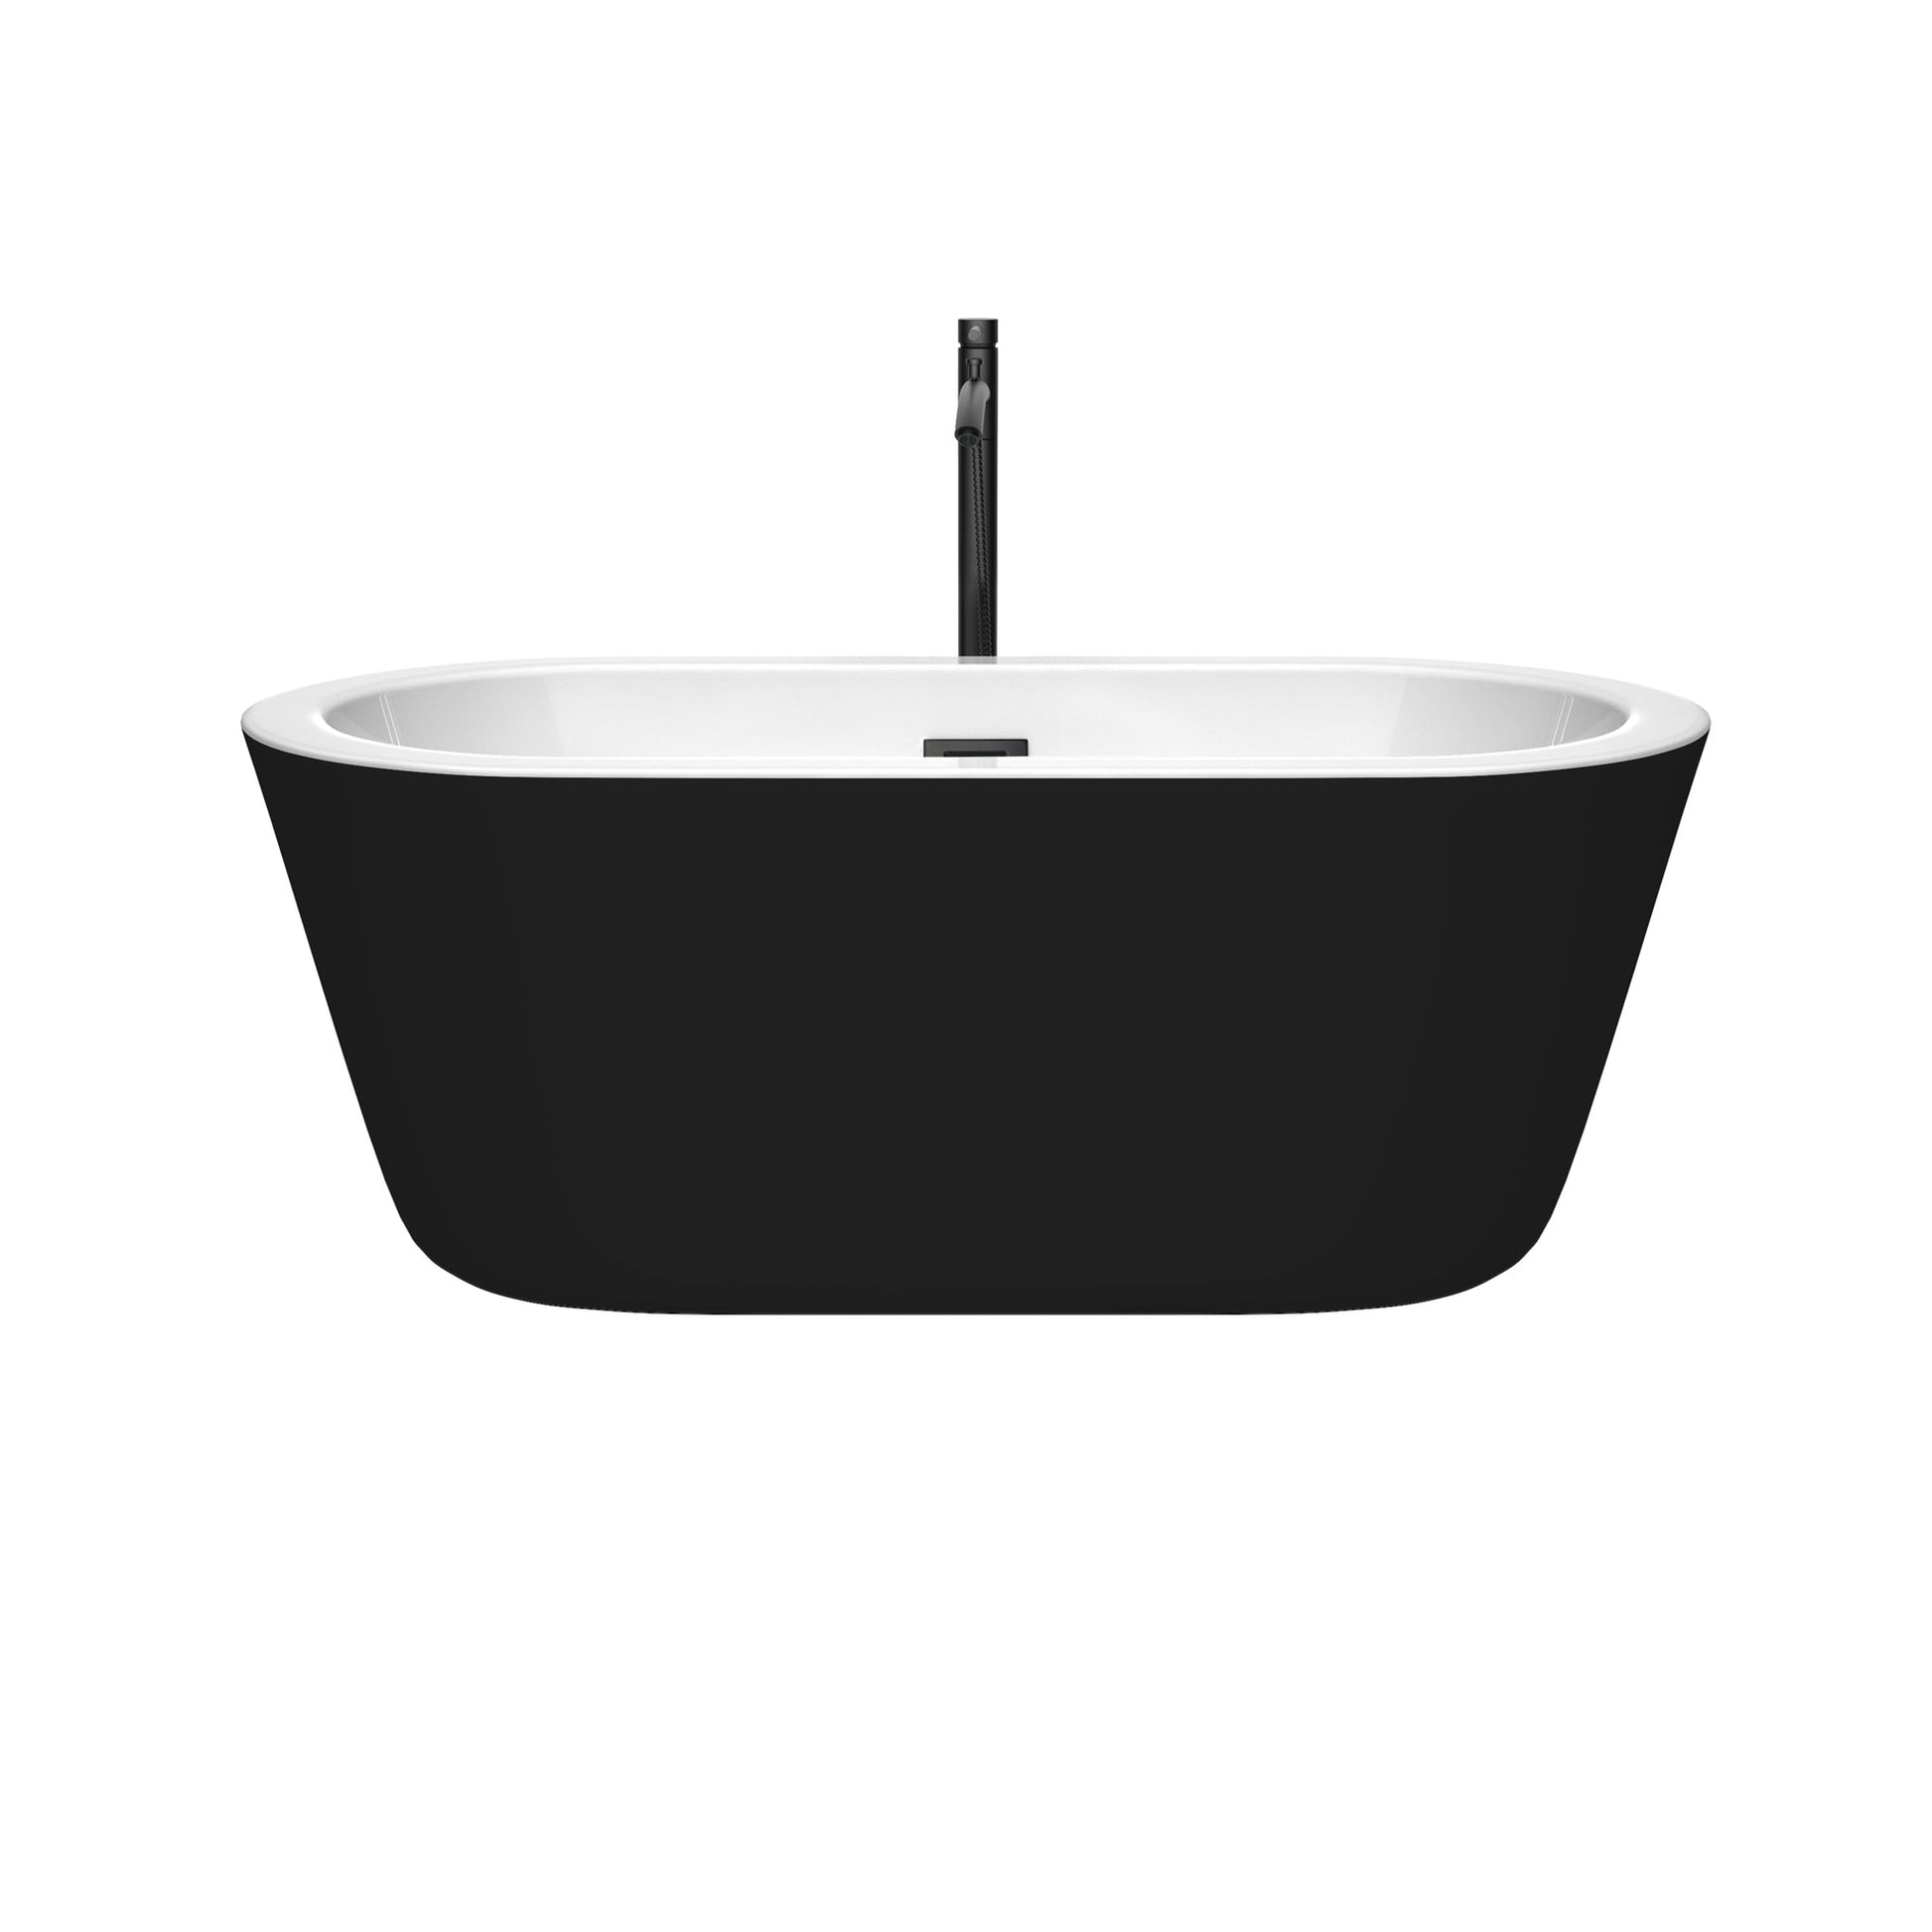 Wyndham Collection Mermaid 60" Freestanding Bathtub in Black With White Interior With Floor Mounted Faucet, Drain and Overflow Trim in Matte Black